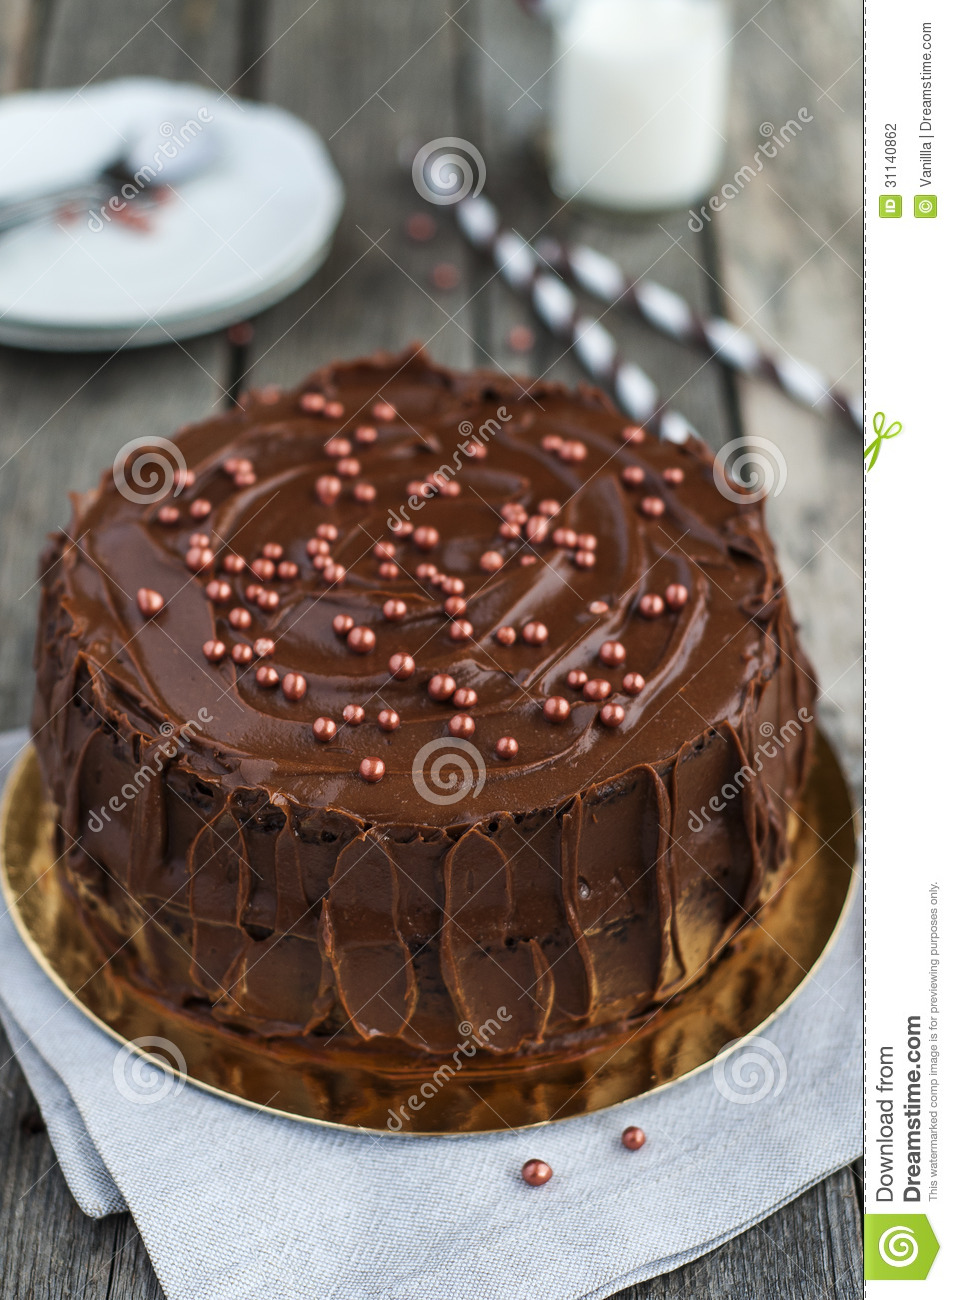 Chocolate Cakes with Sugar Pearls